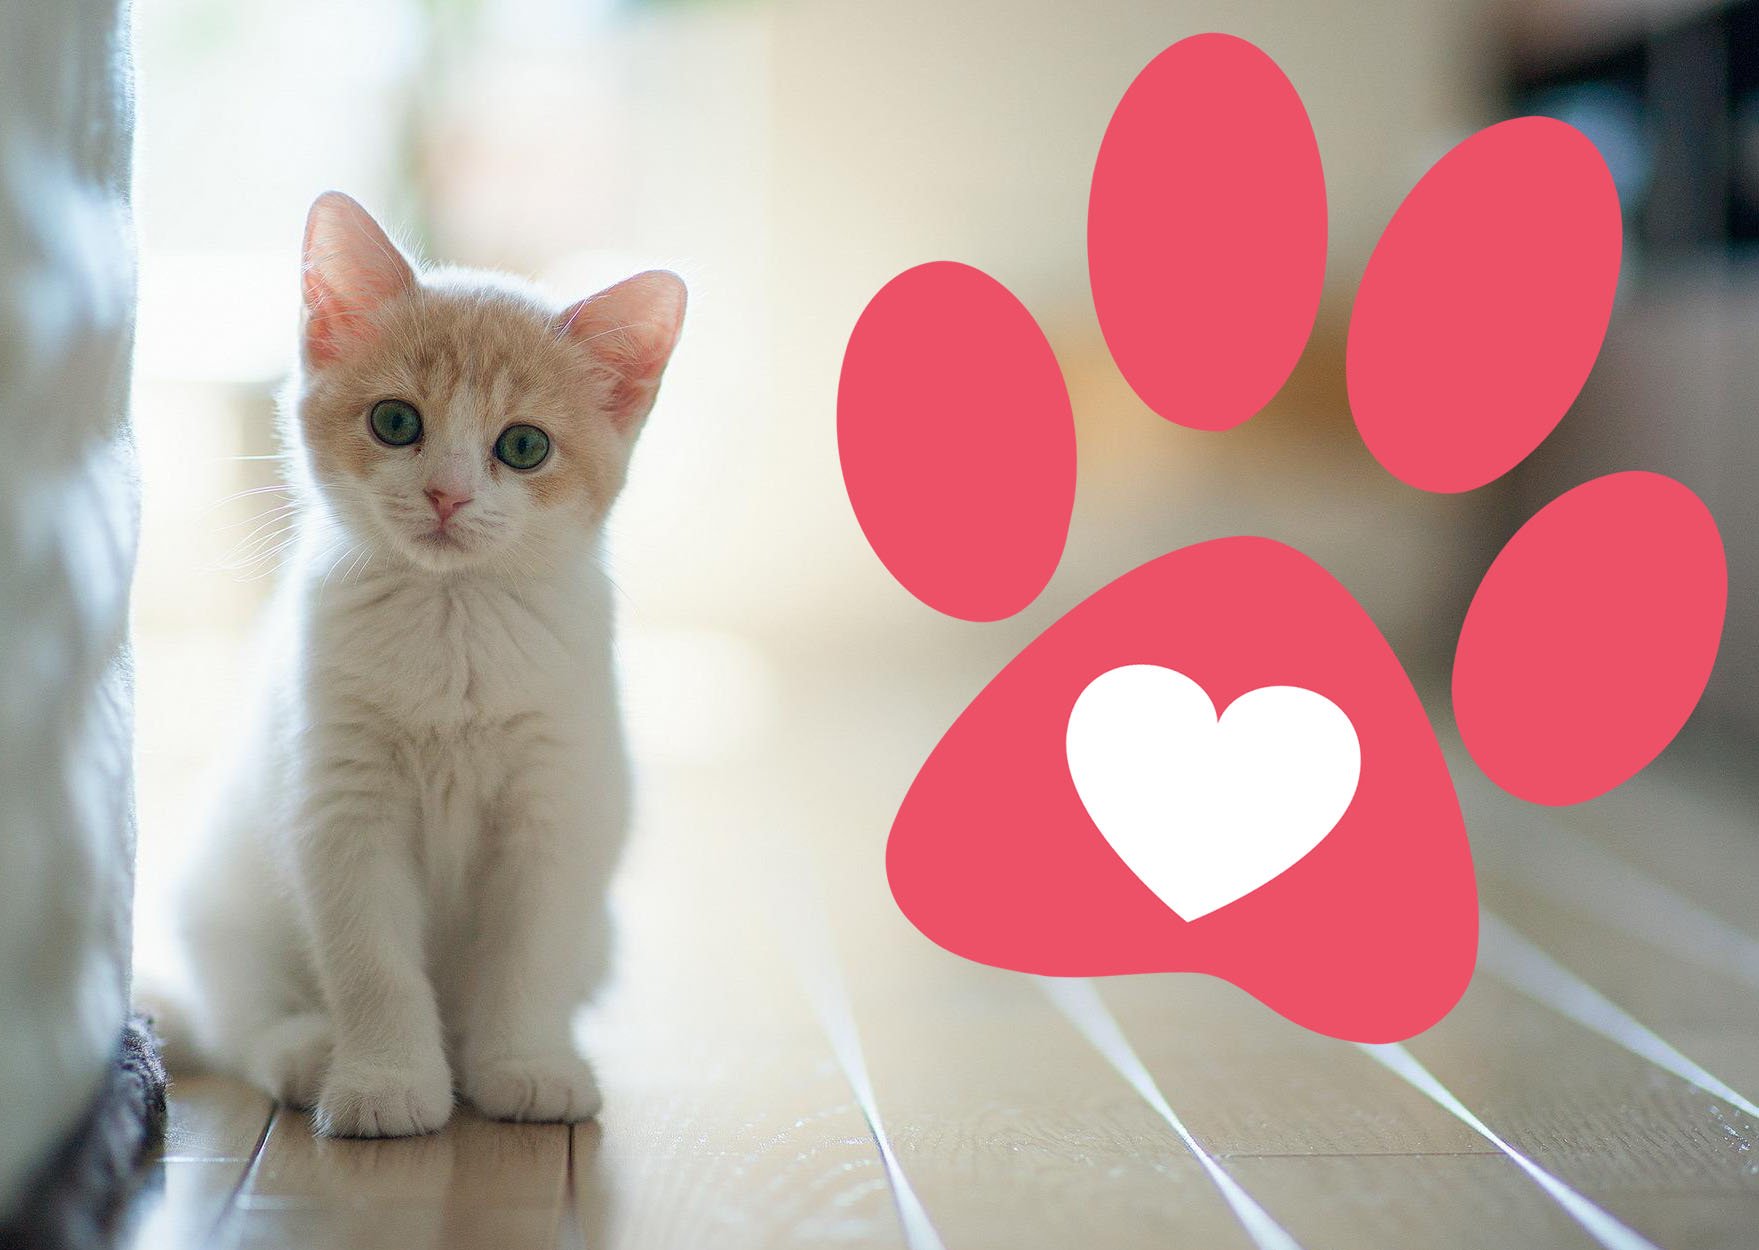 All you need is love & cat ❤️
welcome to our community
it's about kittens health, memes, funny cat moments, awesome topics and more